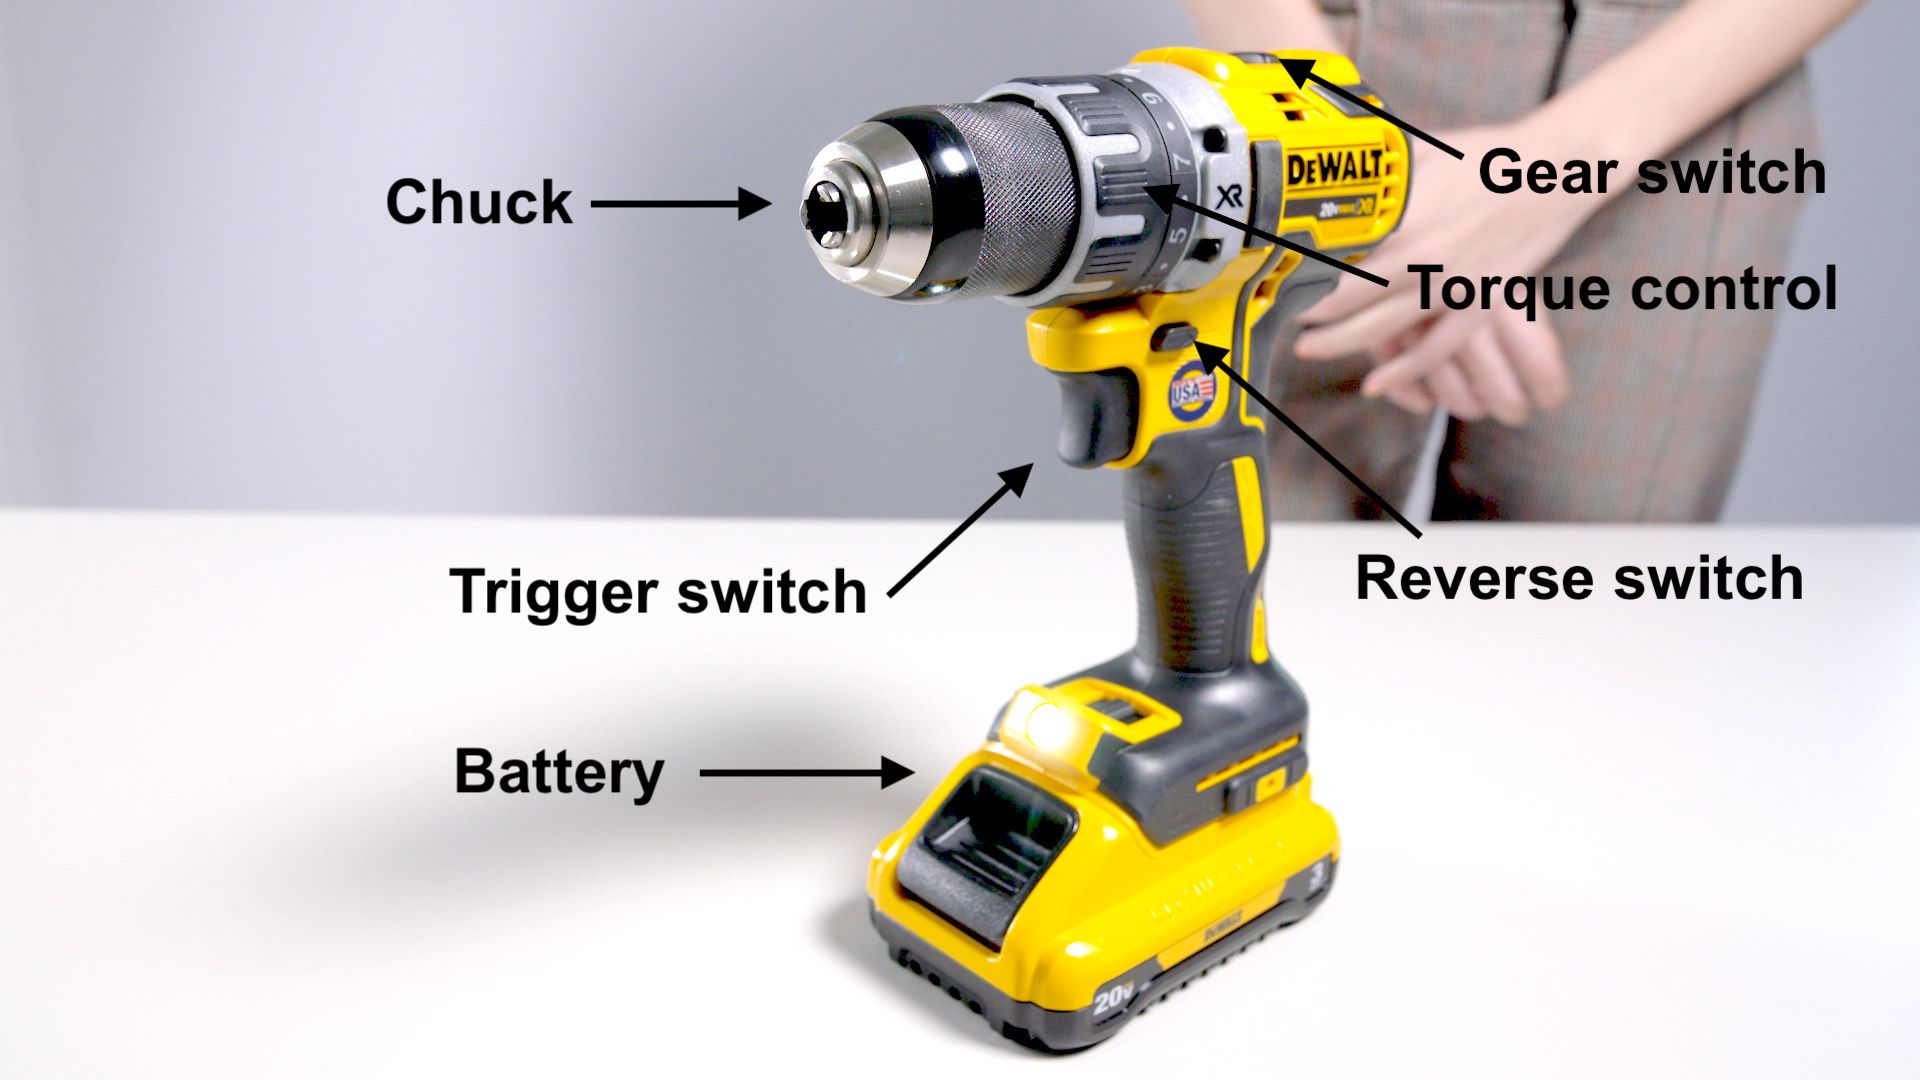 is used to open and close the chuck on a power drill? 2